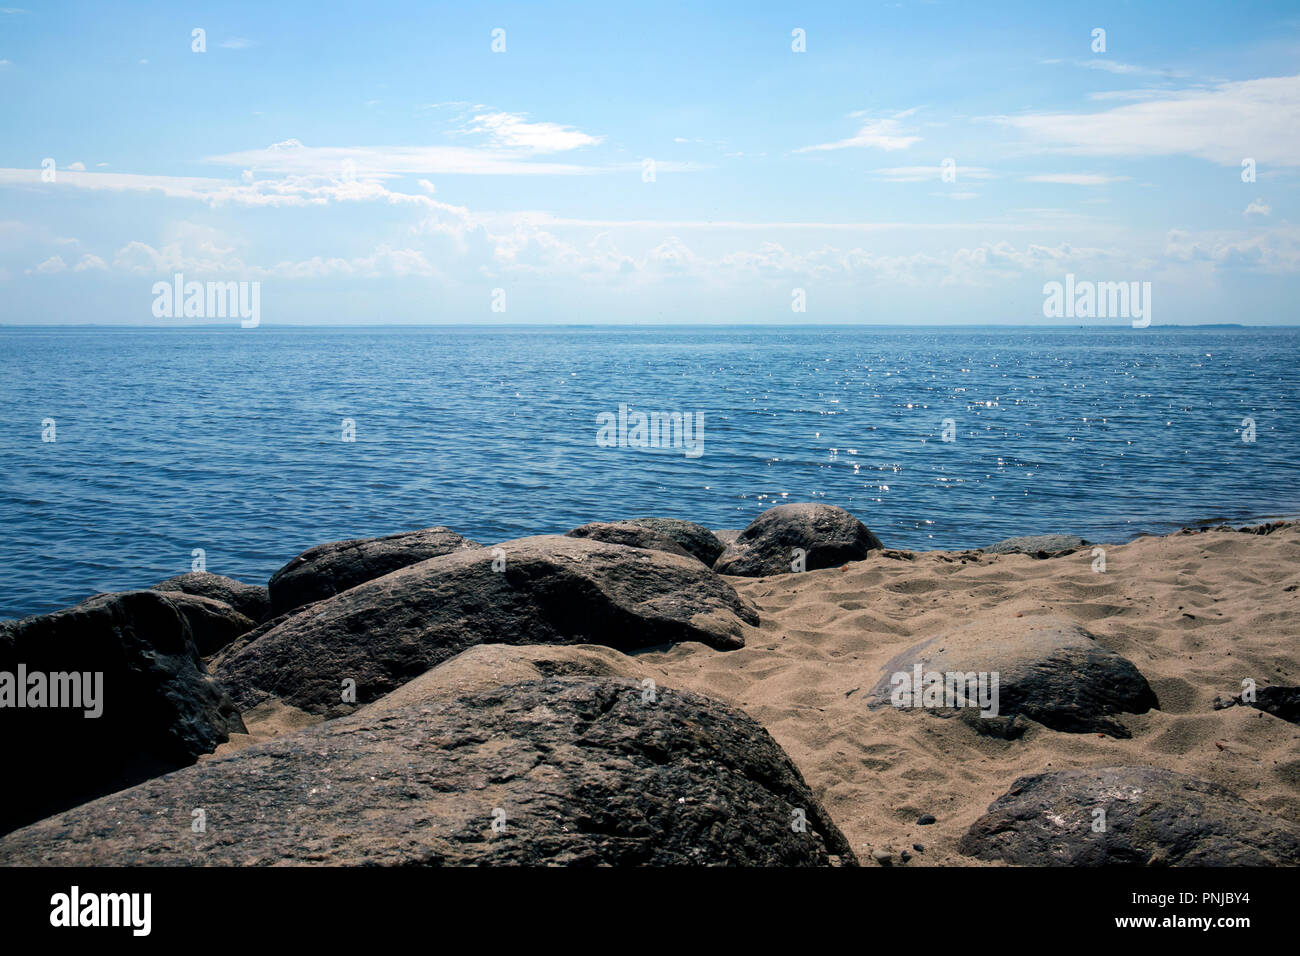 Picturesque landscape with sandy shore, boulders, sea and sky, atmospheric view Stock Photo